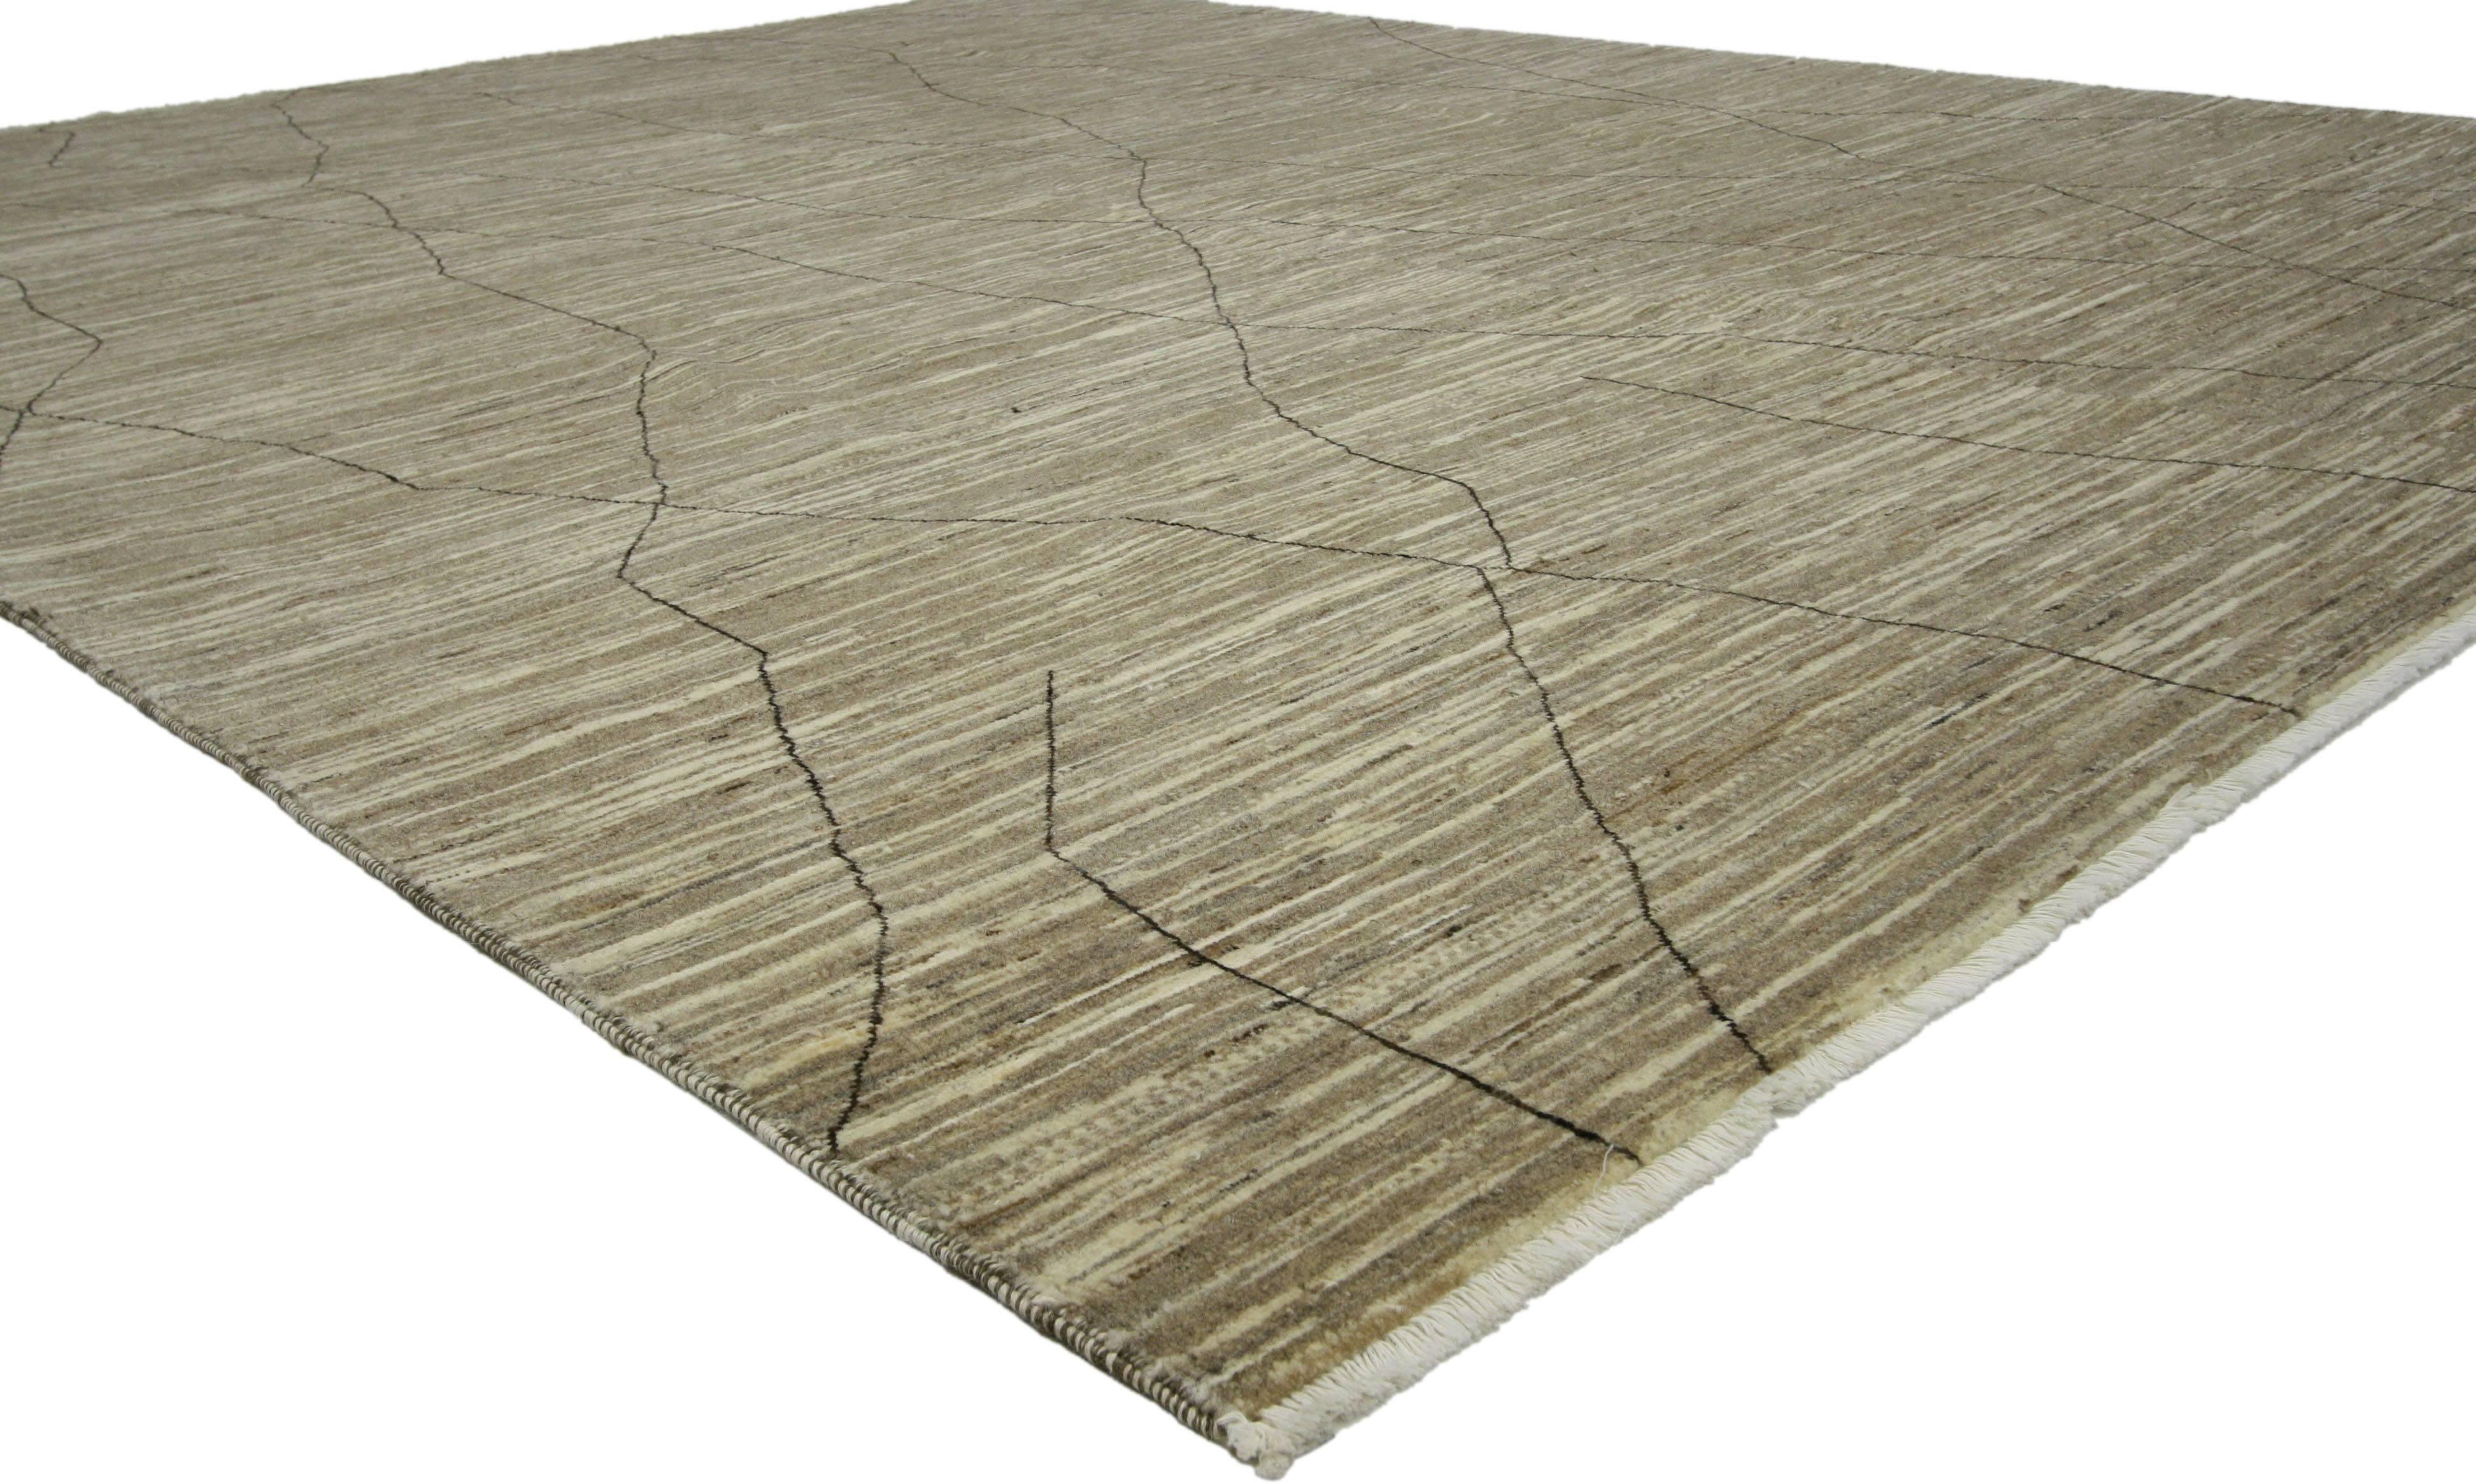 Mid-Century Modern New Contemporary Moroccan Area Rug with Modern Design, Warm Neutral Earth Tones